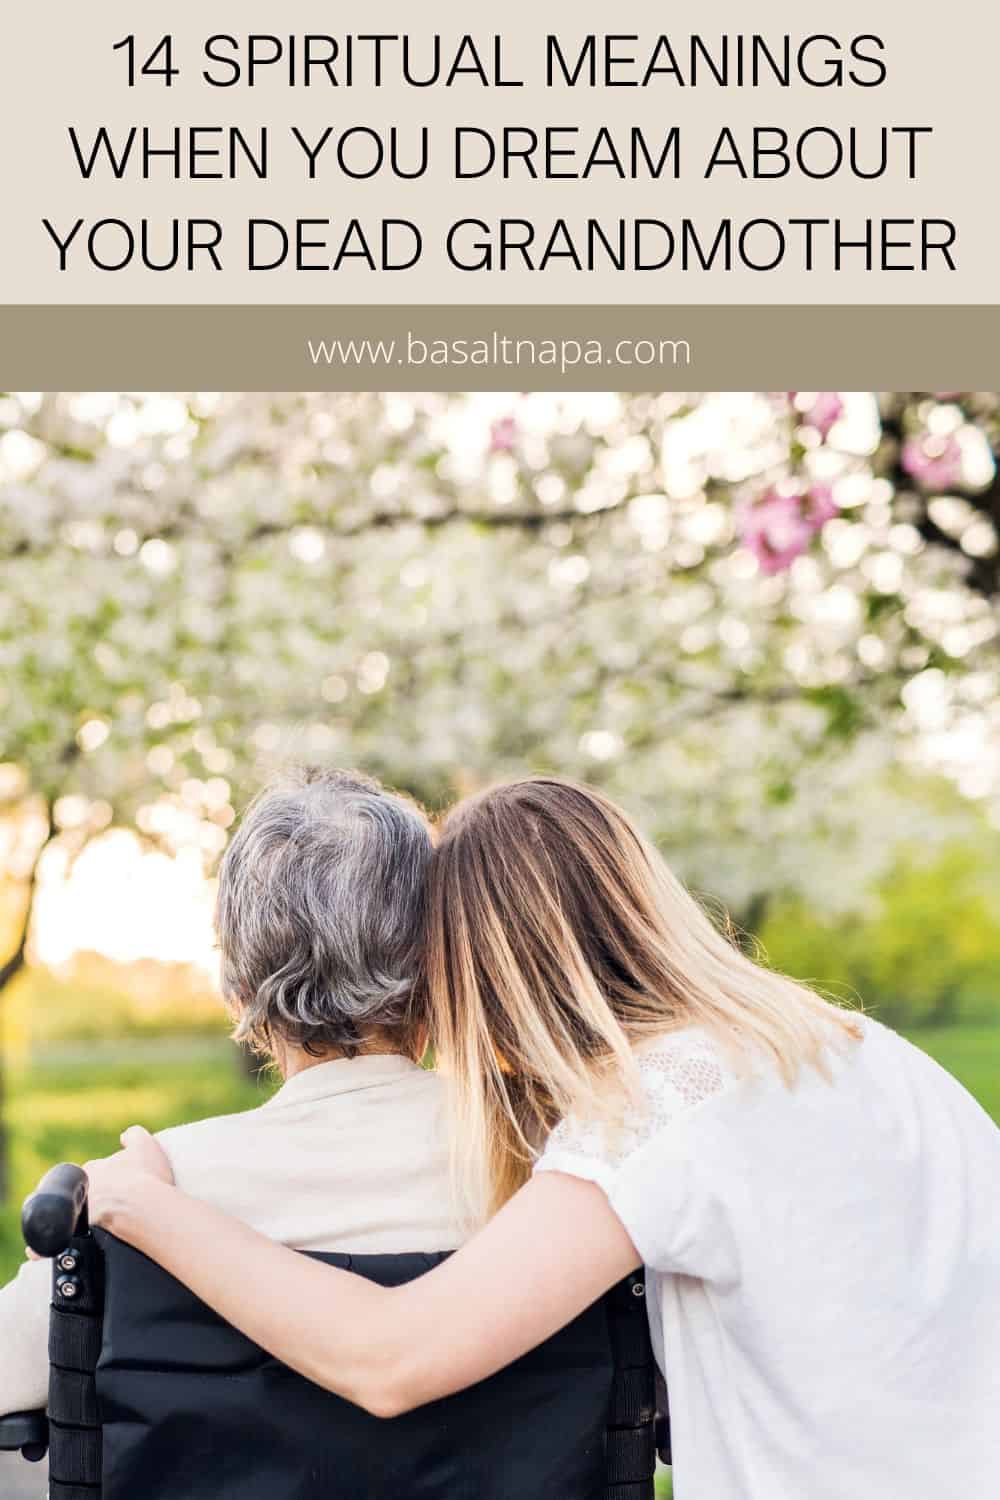 14 Spiritual Meanings When You Dream About Your Dead Grandmother